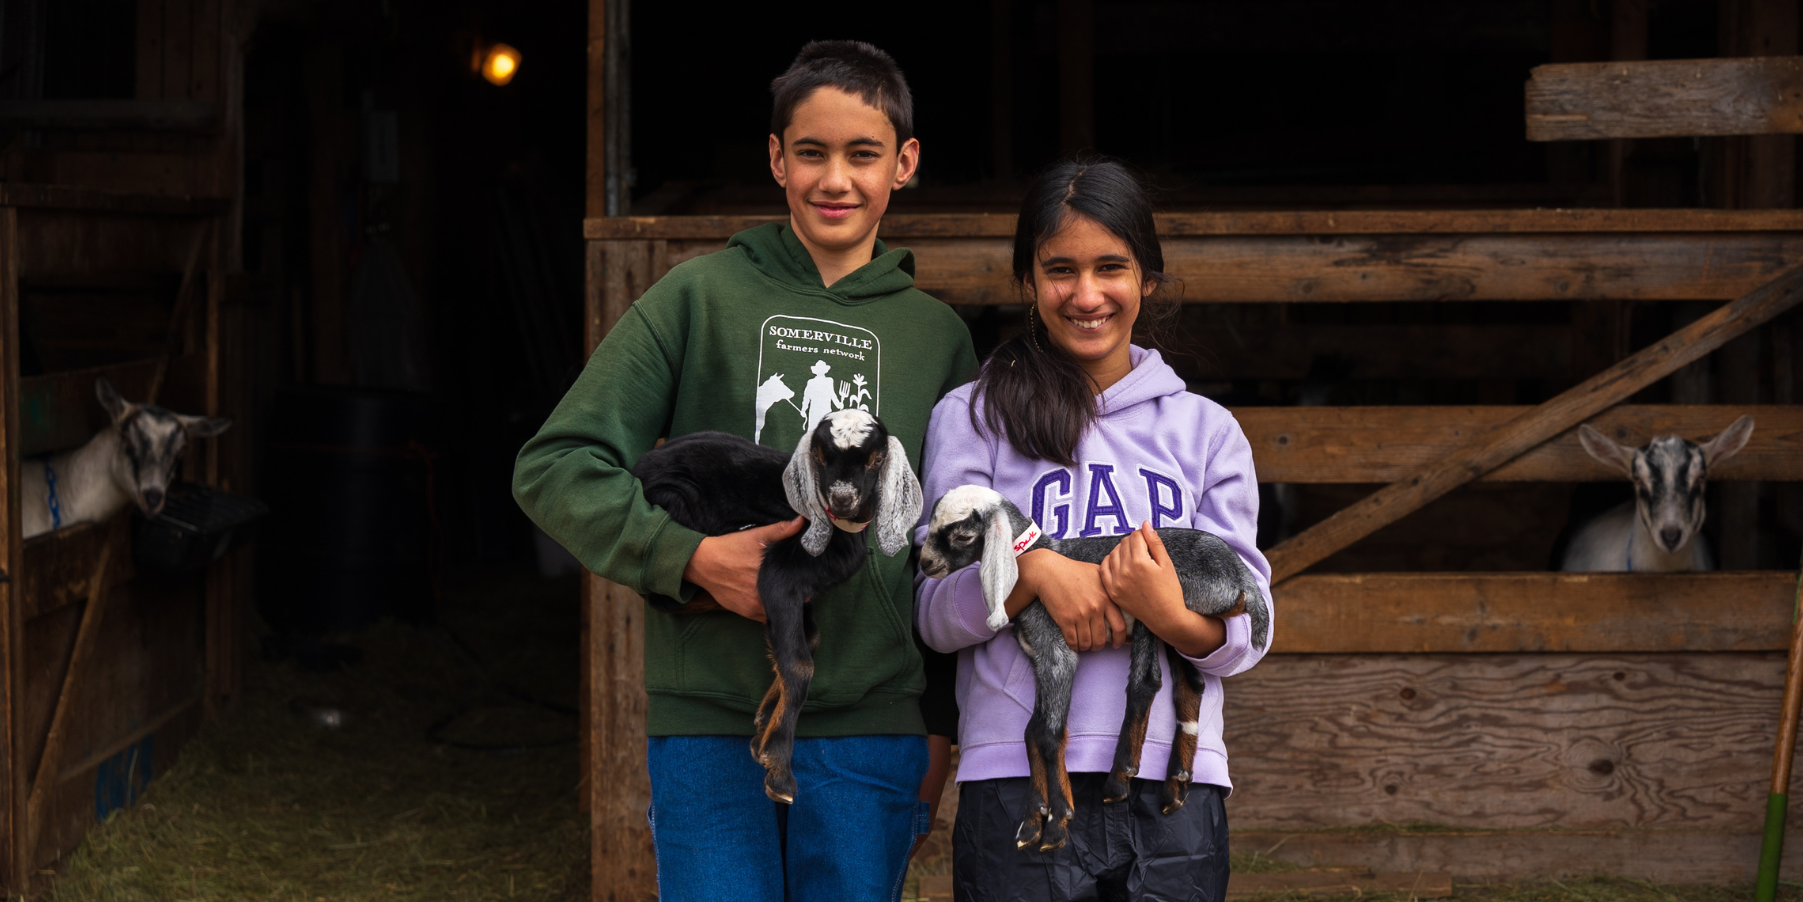 Young boy and girl with two baby goats at the enterance to the barn at Pumpkin Vine farm in Midcoast Maine.